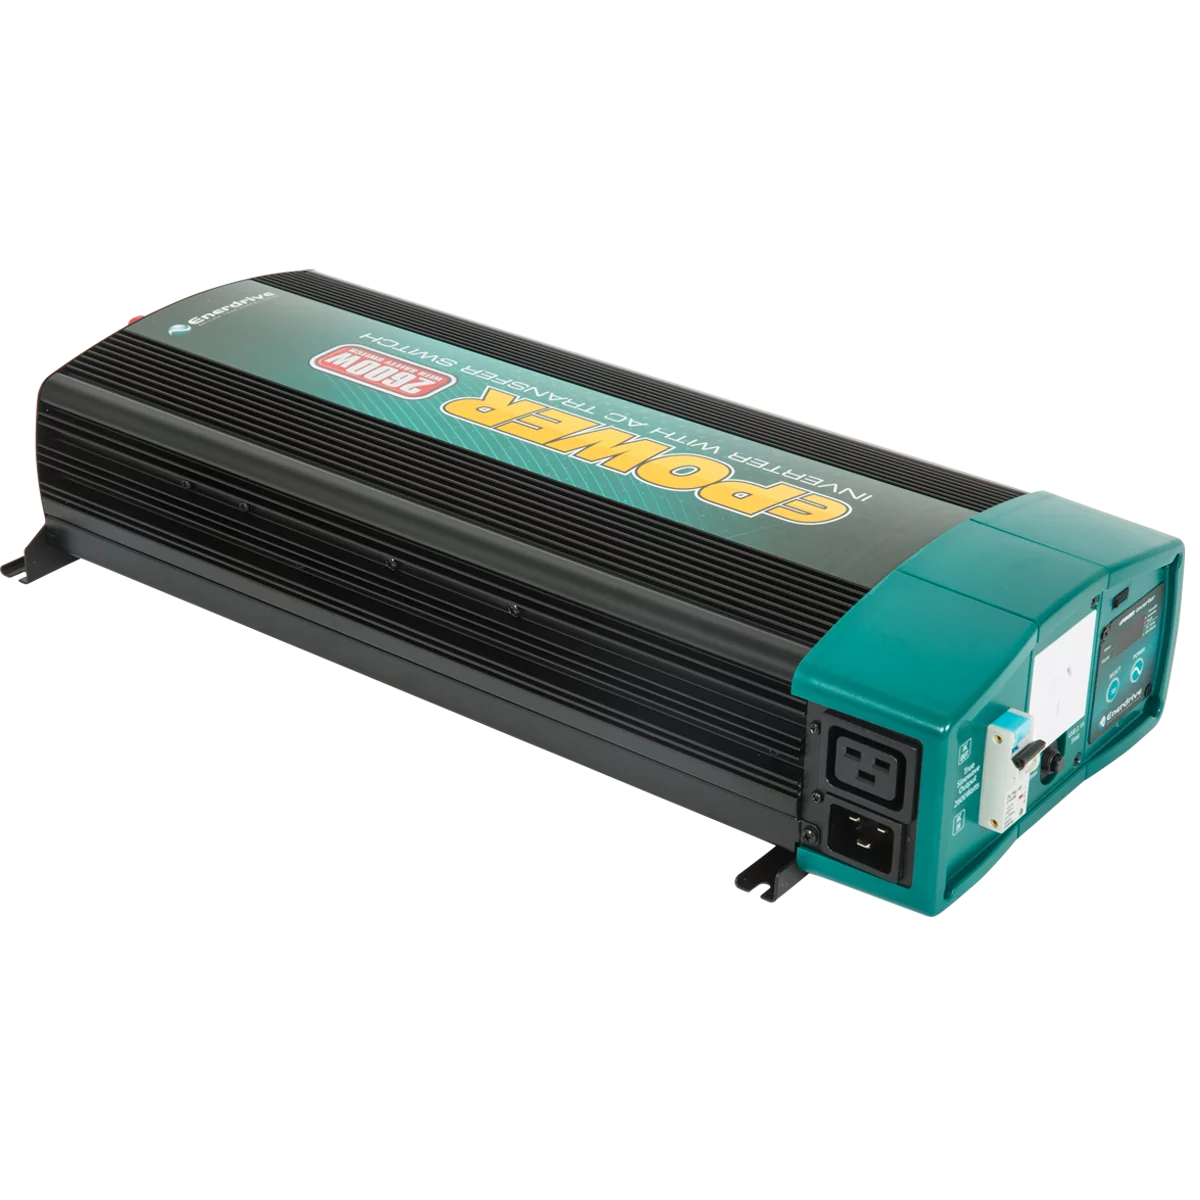 Enerdrive ePOWER 12V to 240V 2600W Pure Sine Wave Inverter with RCD & AC Transfer Switch